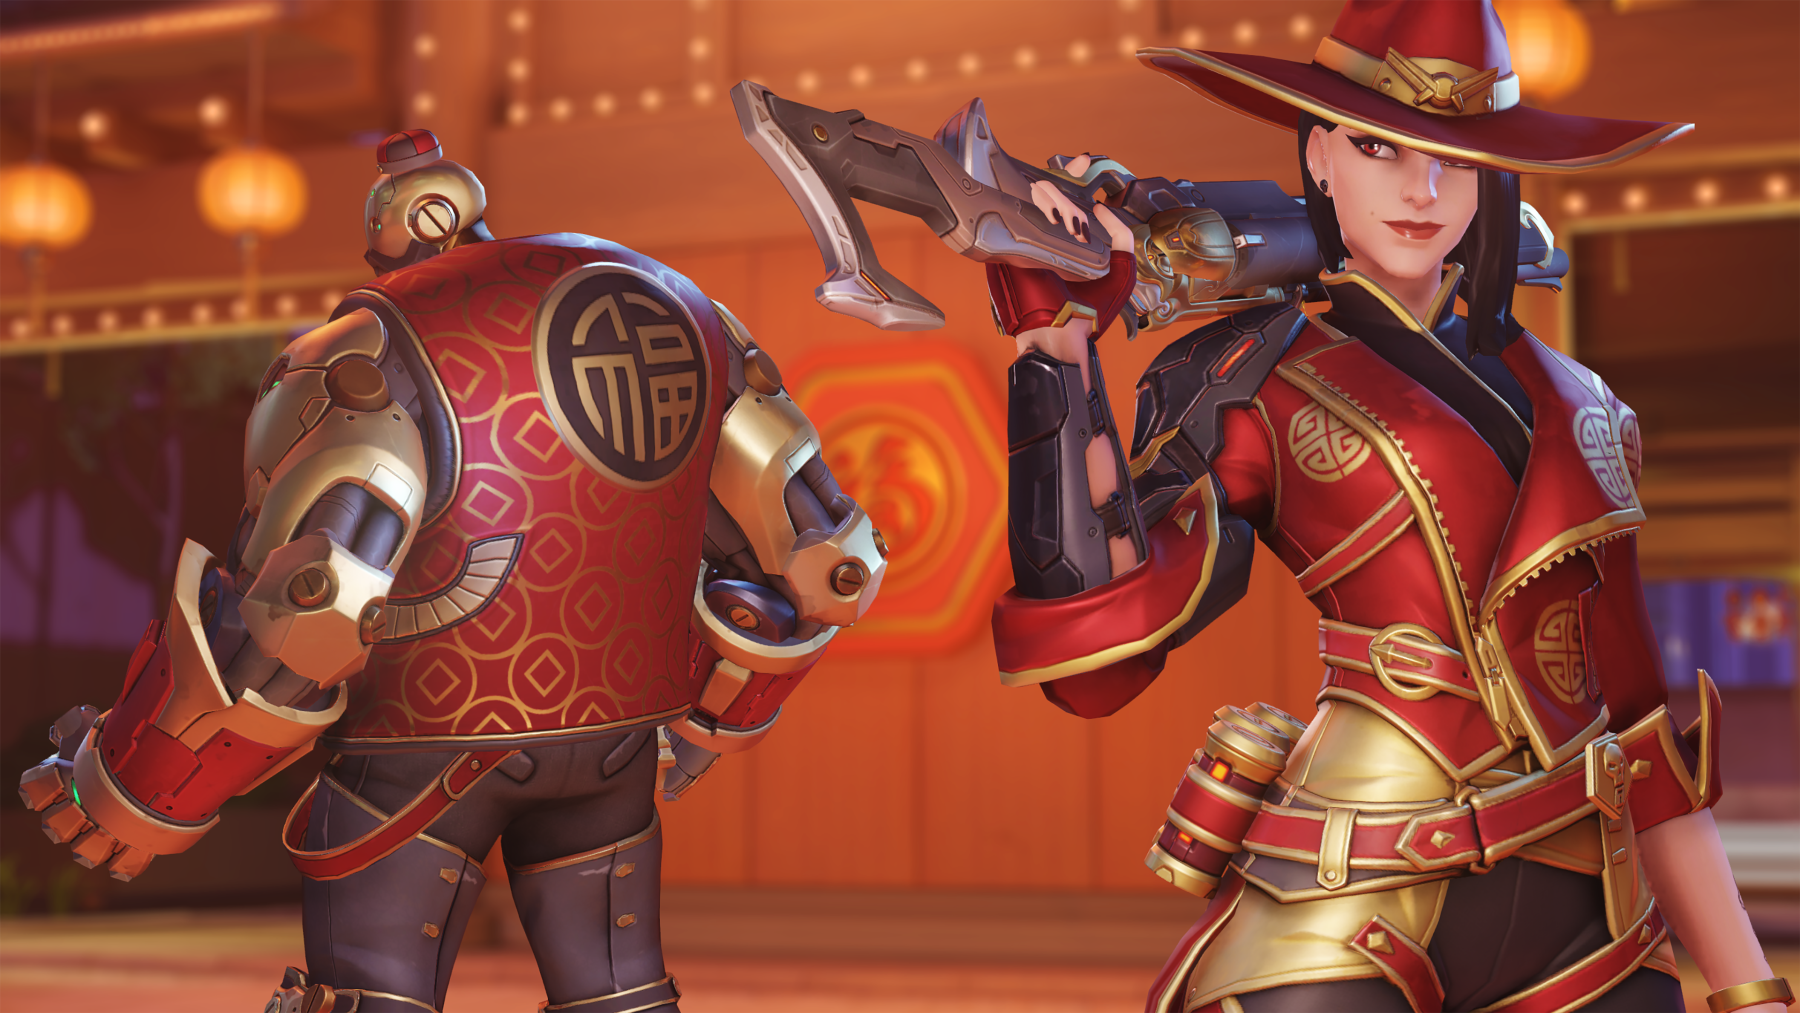 OVERWATCH LUNAR NEW YEAR EVENT 2022 ONLY HAS 2 NEW LEGENDARY SKINS